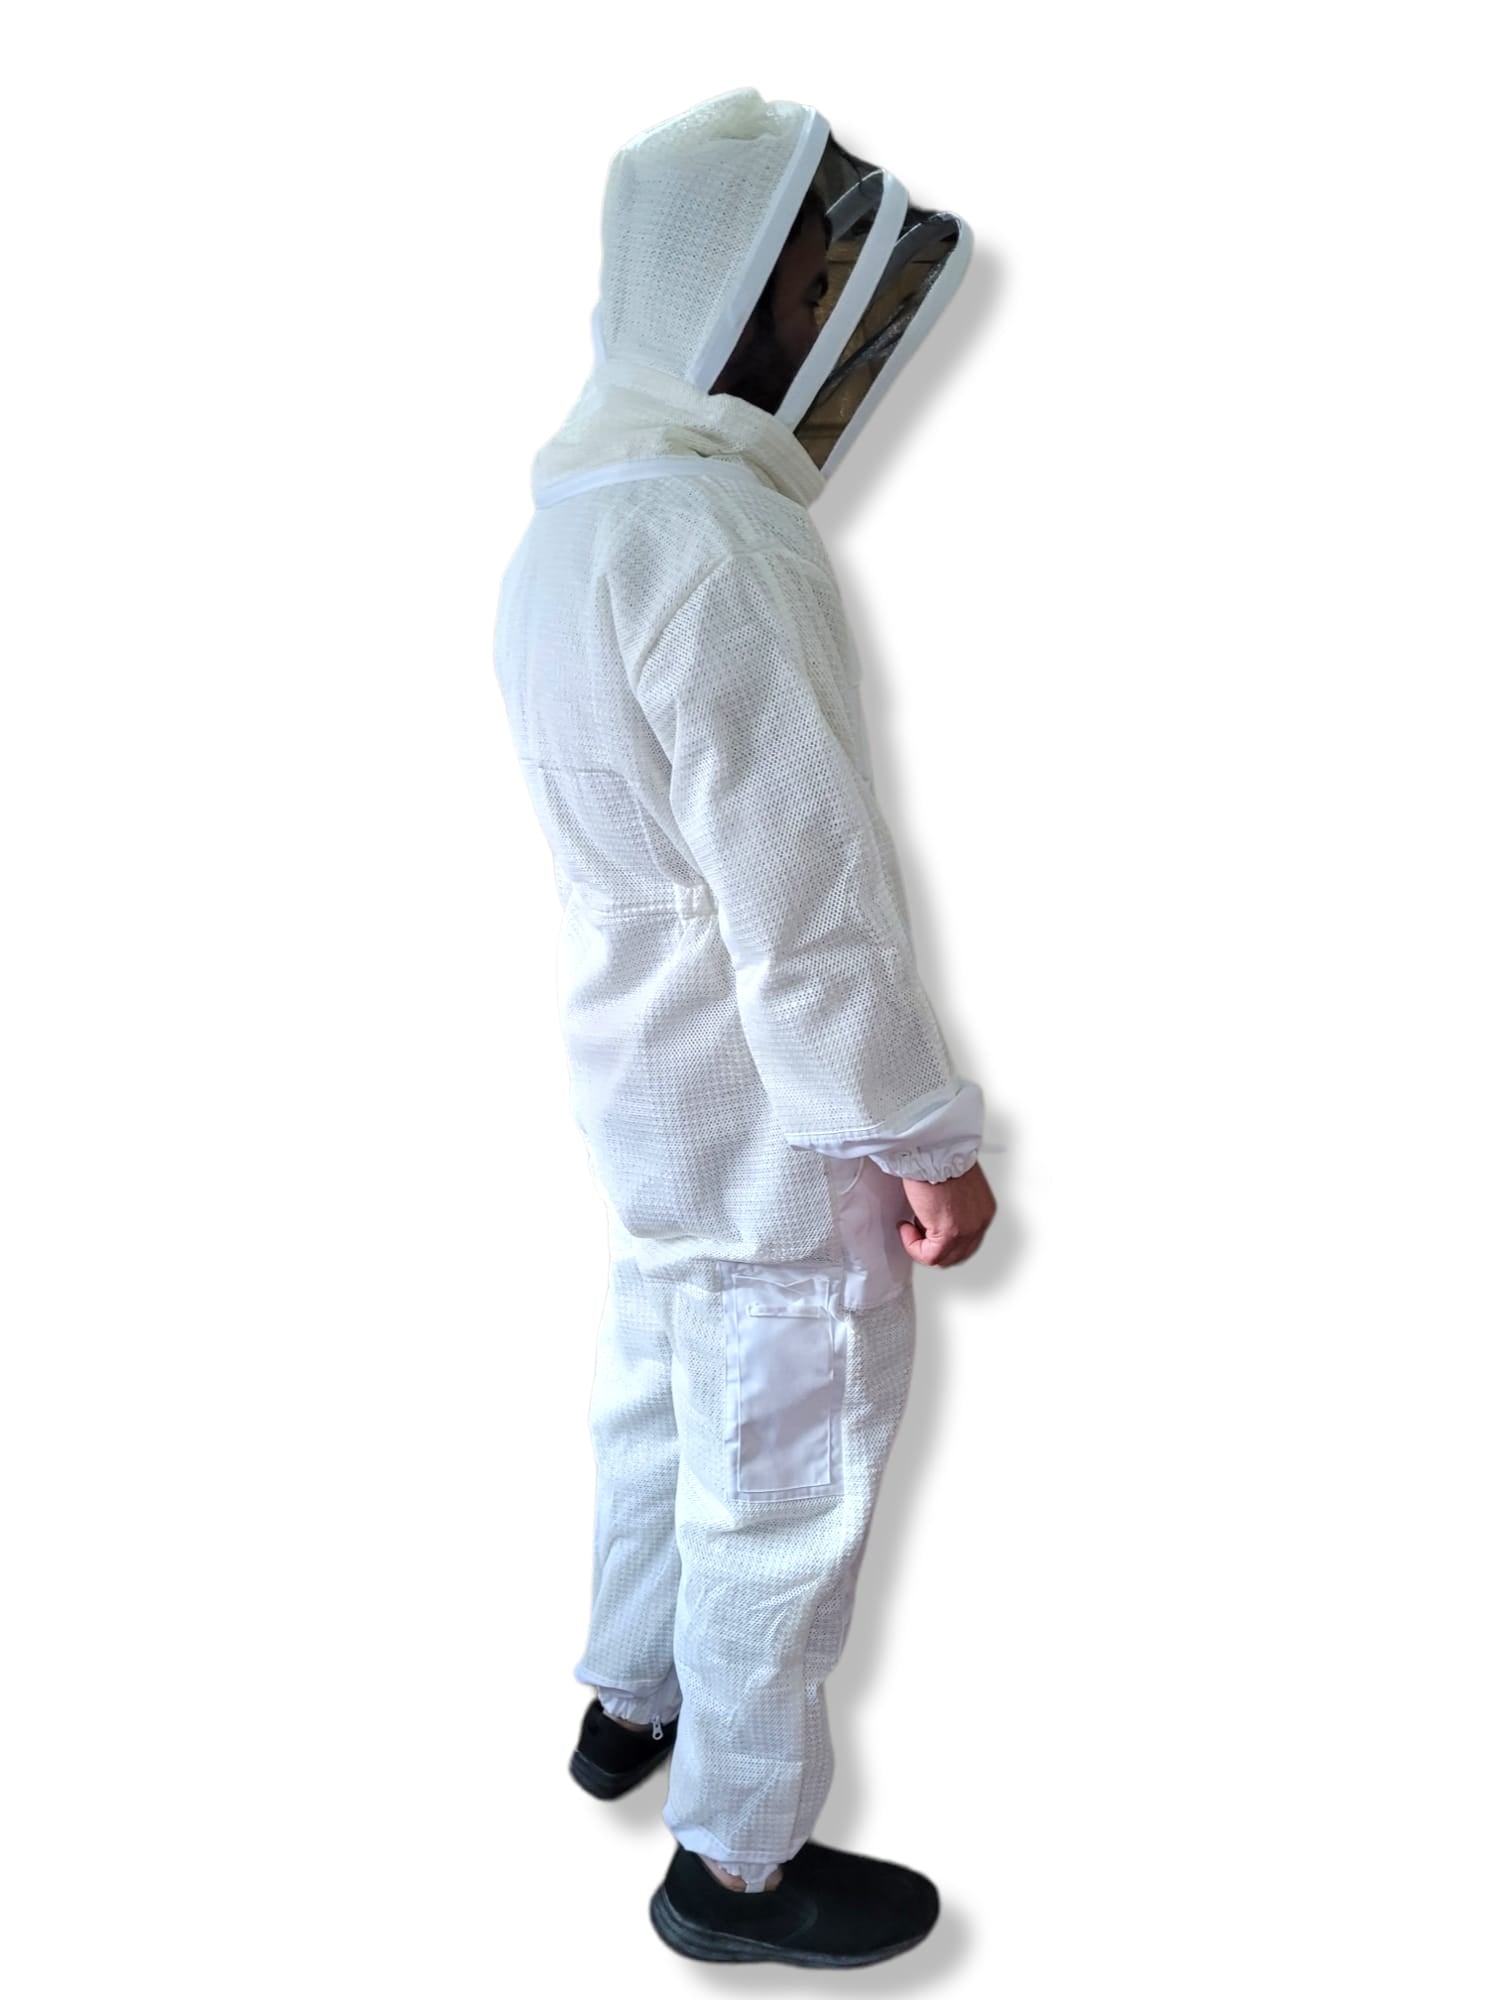 Fully Ventilated Beekeeping Suit - Donagh Bees